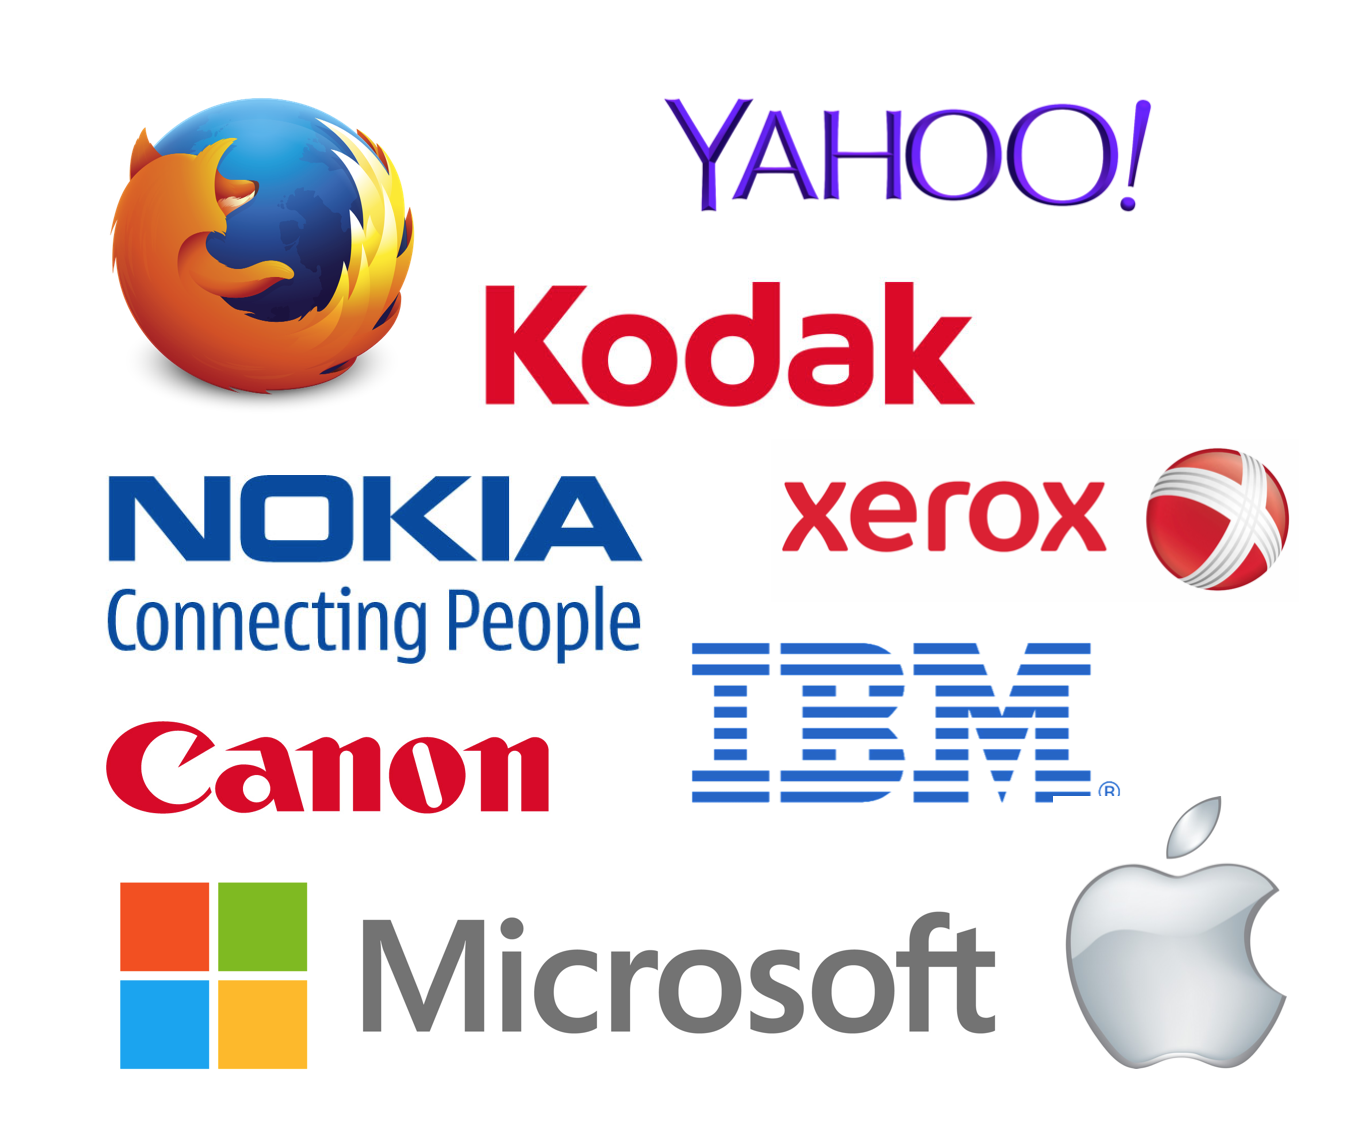 internet logos from the 90s